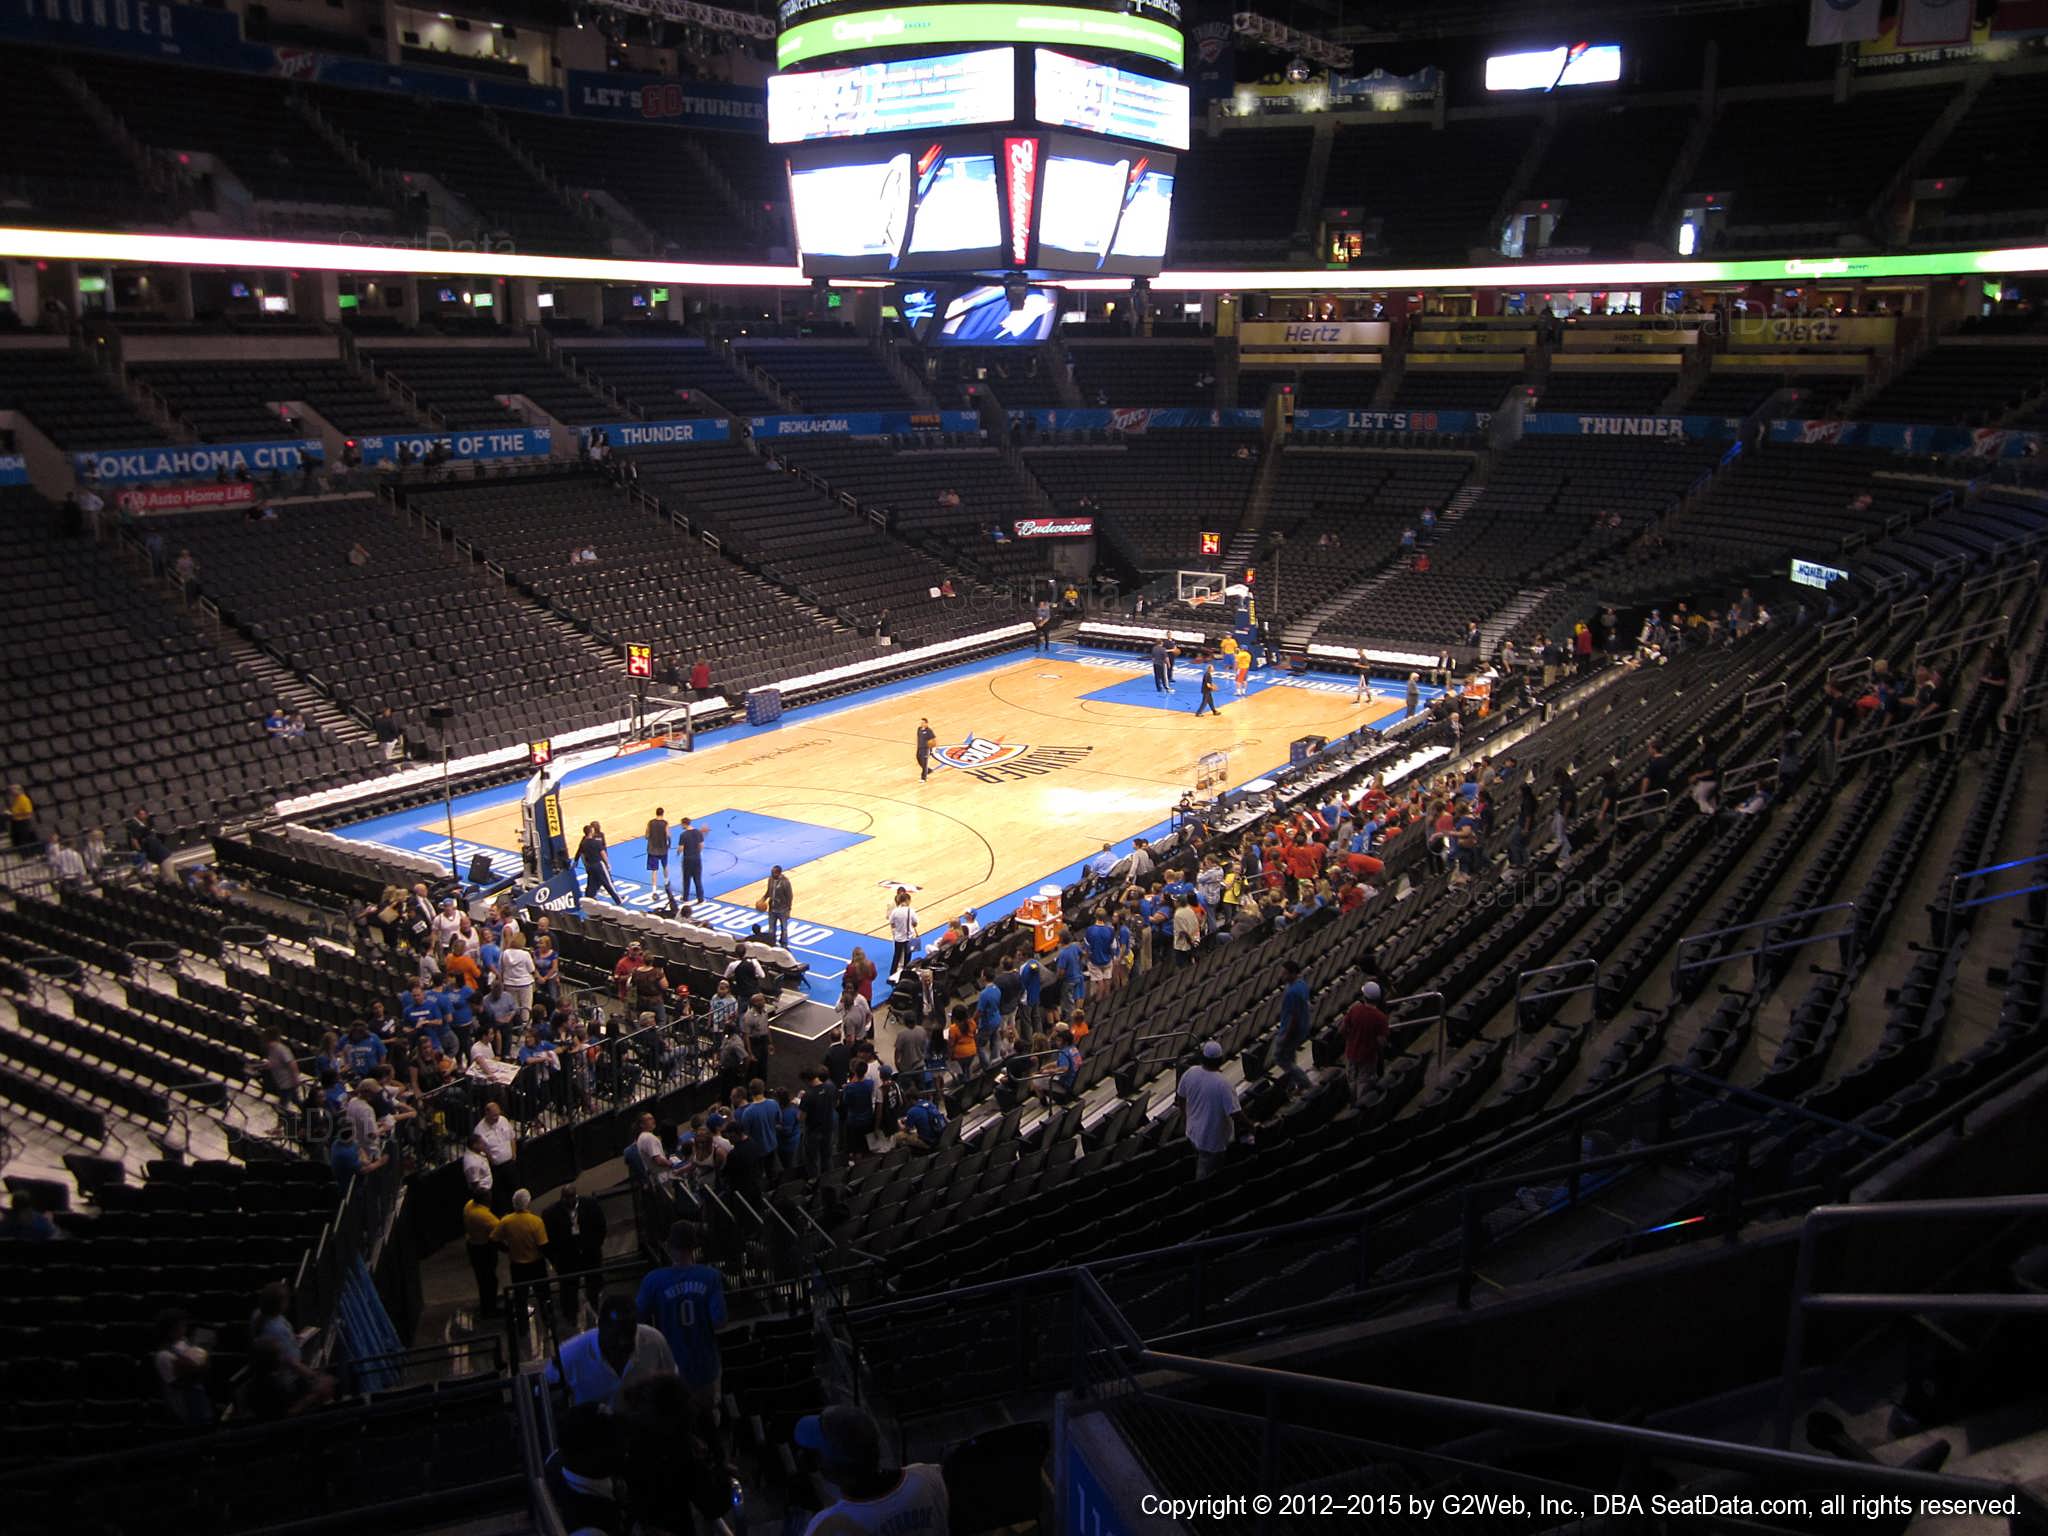 Seat view from section 227 at Chesapeake Energy Arena, home of the Oklahoma City Thunder